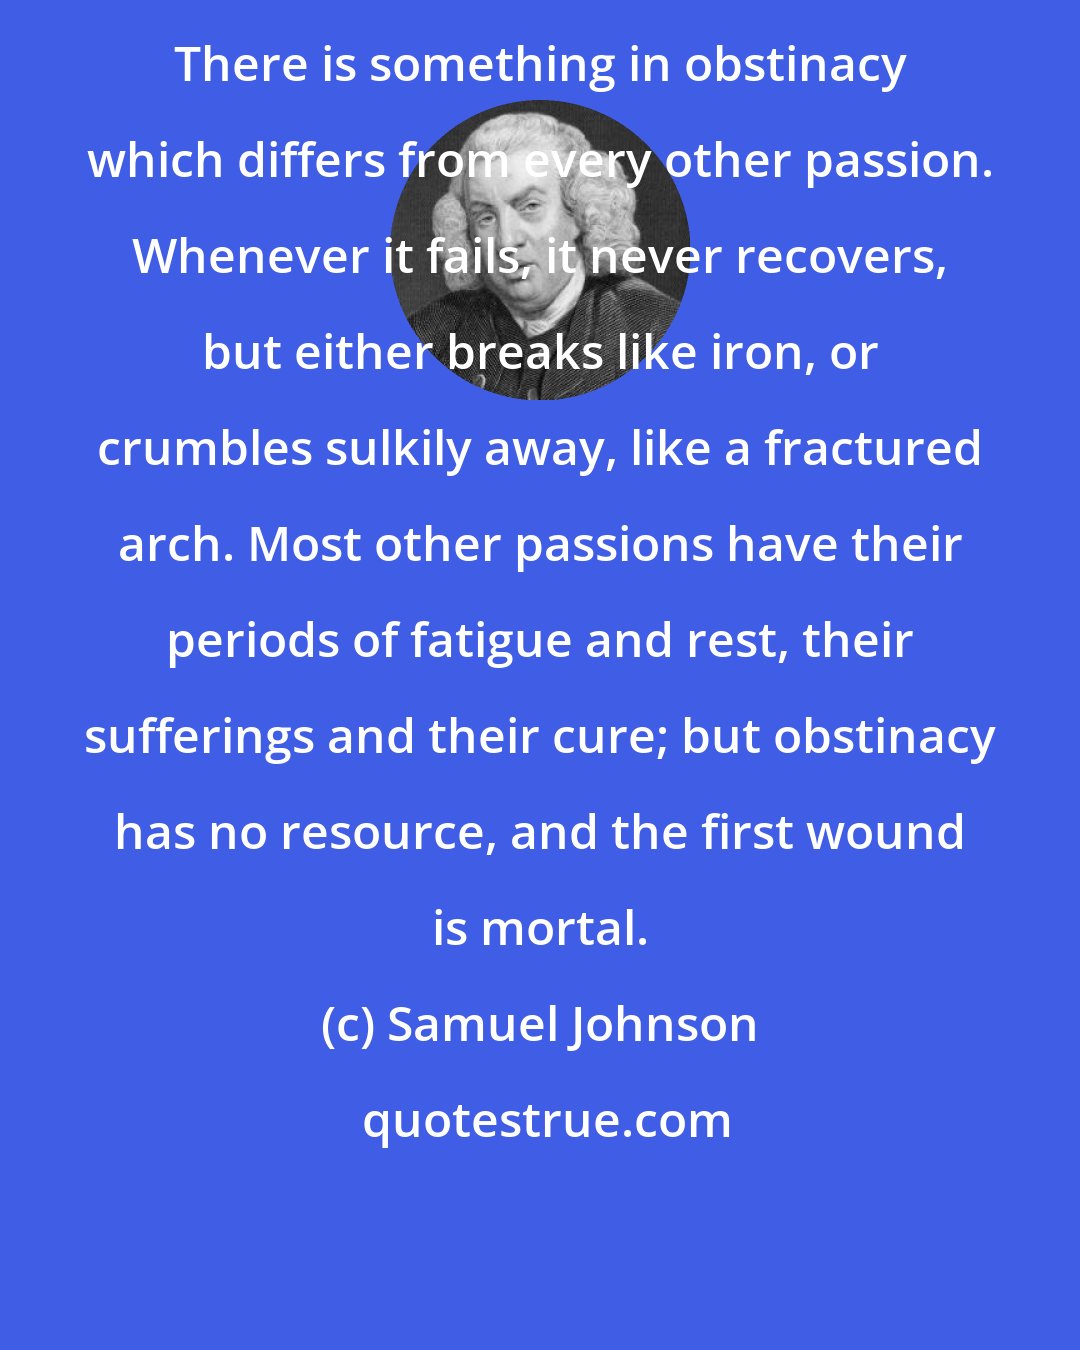 Samuel Johnson: There is something in obstinacy which differs from every other passion. Whenever it fails, it never recovers, but either breaks like iron, or crumbles sulkily away, like a fractured arch. Most other passions have their periods of fatigue and rest, their sufferings and their cure; but obstinacy has no resource, and the first wound is mortal.